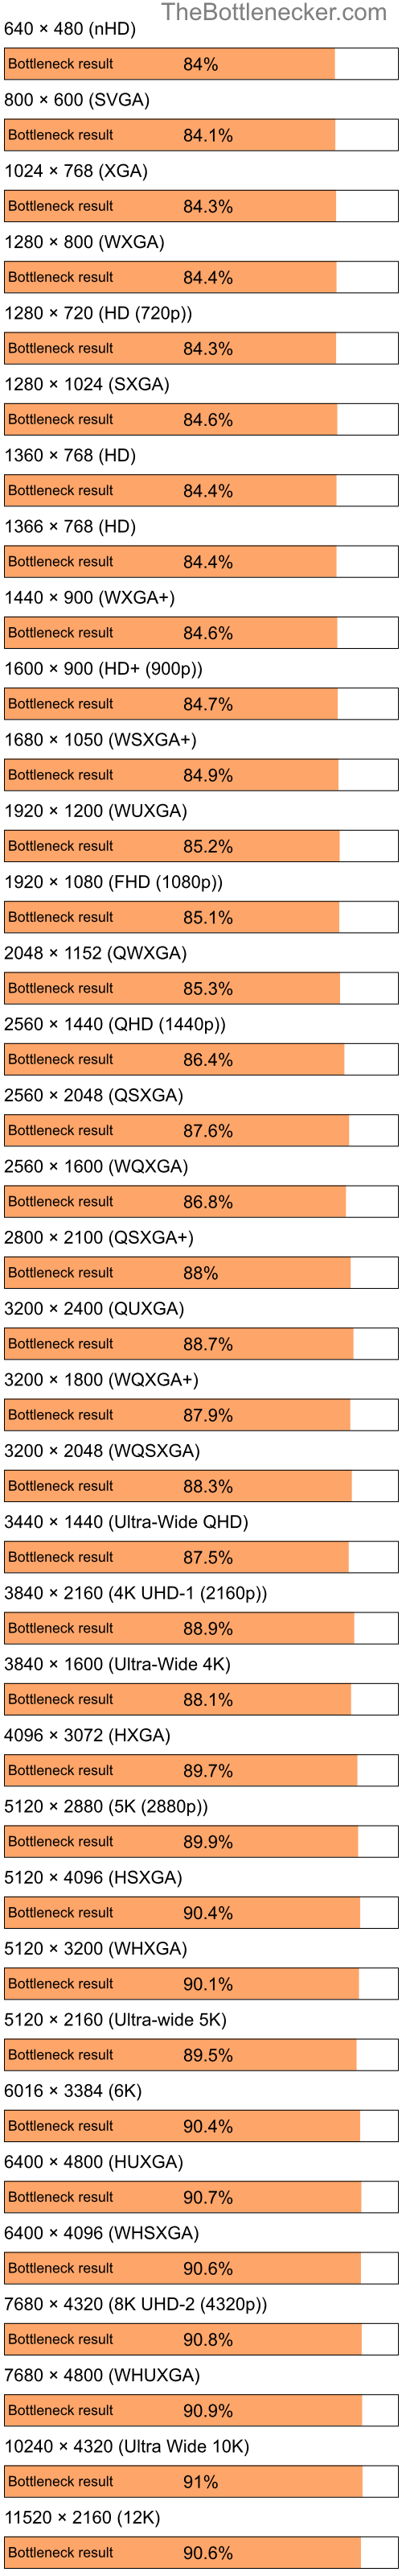 Bottleneck results by resolution for Intel Celeron M 420 and NVIDIA GeForce FX 5700LE in Graphic Card Intense Tasks